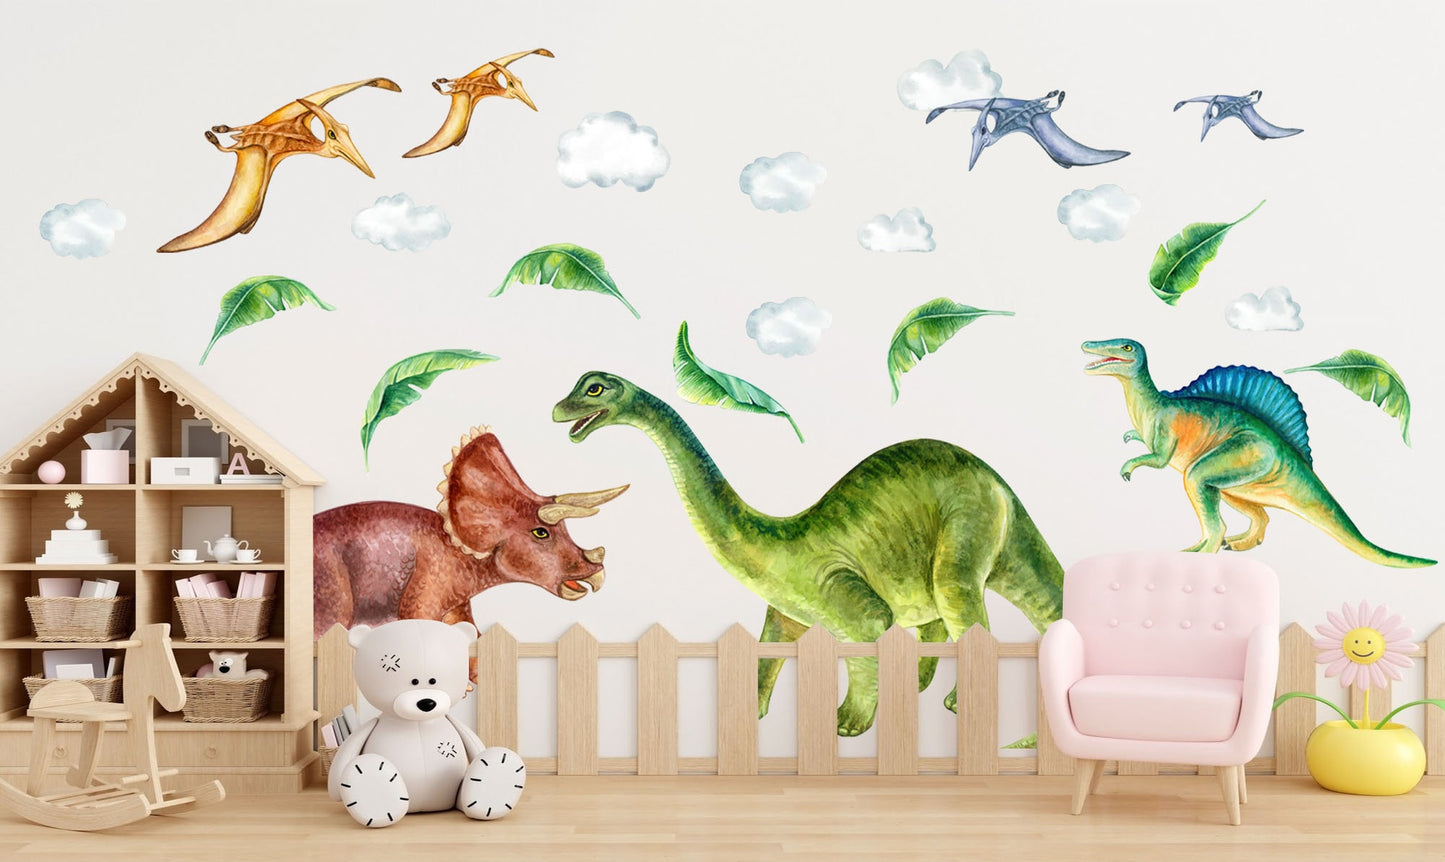 Jurassic Park Prehistory Dinosaurs Removable Wall Decal - Peel and Stick - BR176